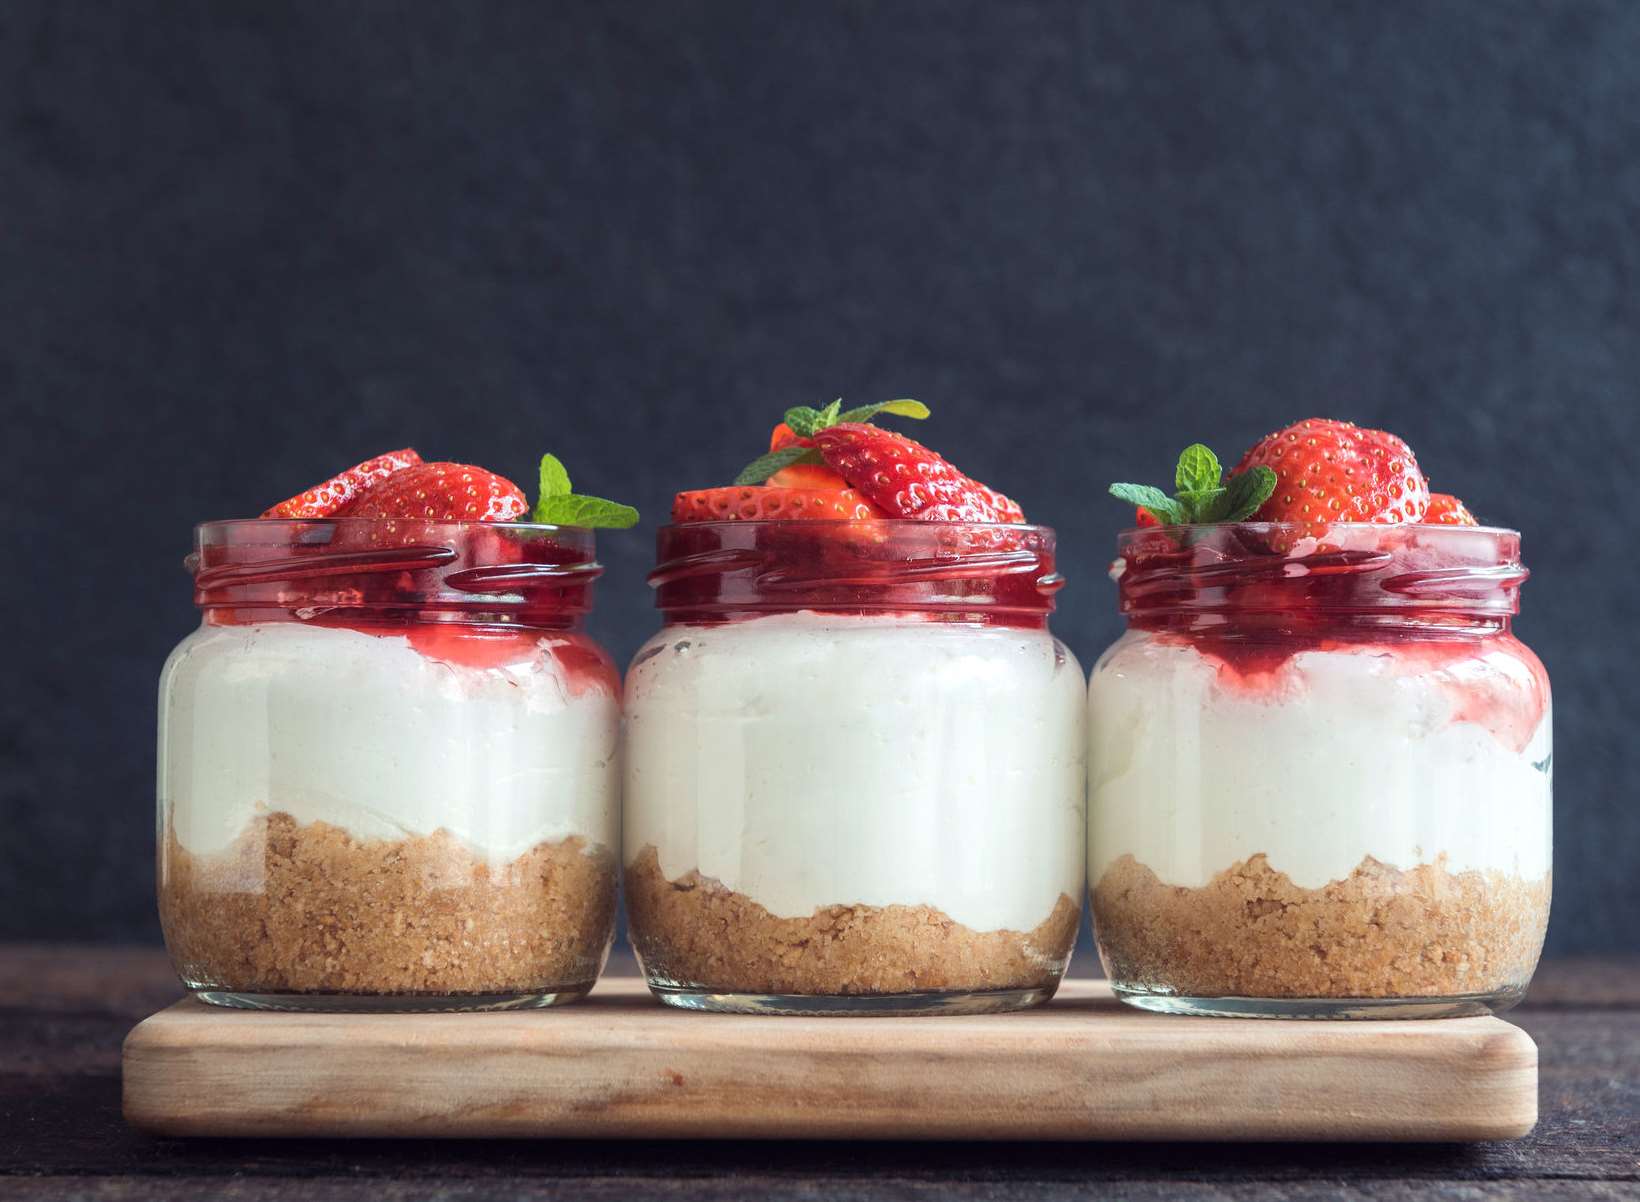 Cheesecakes in mason jars - a good idea as long as you weren't doing the washing up